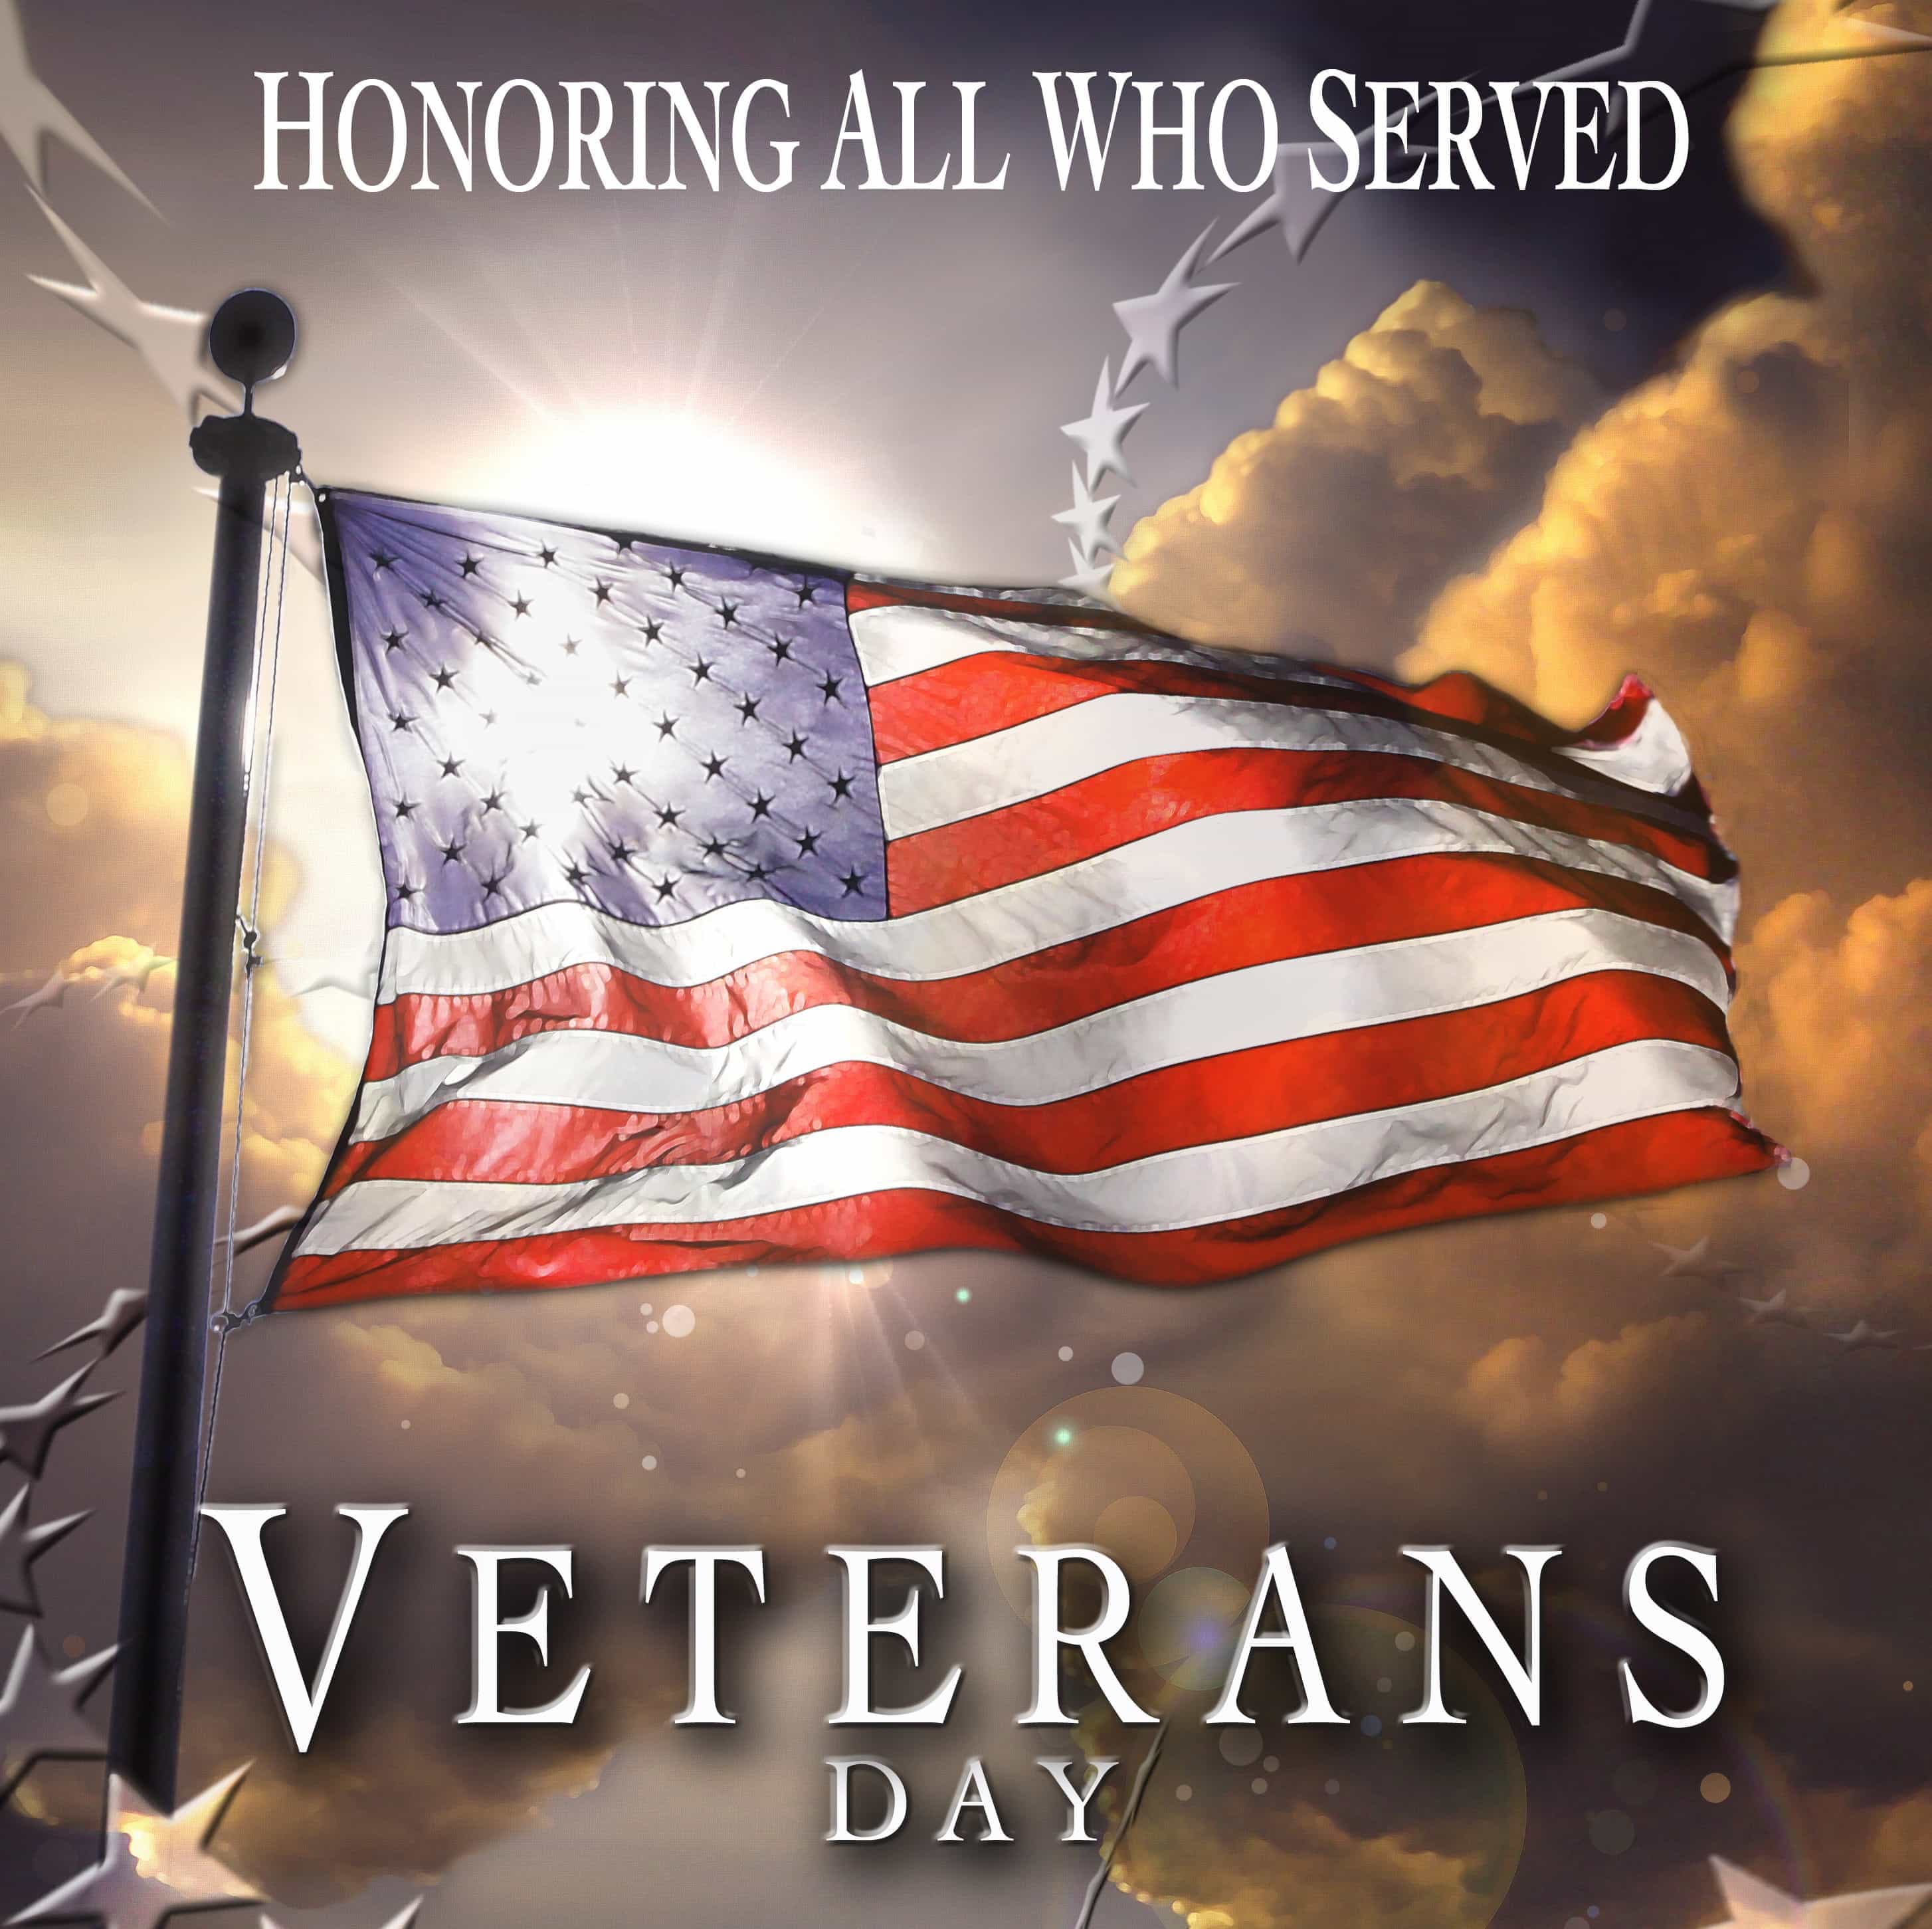 Veterans Day – Thank you just isn't enough